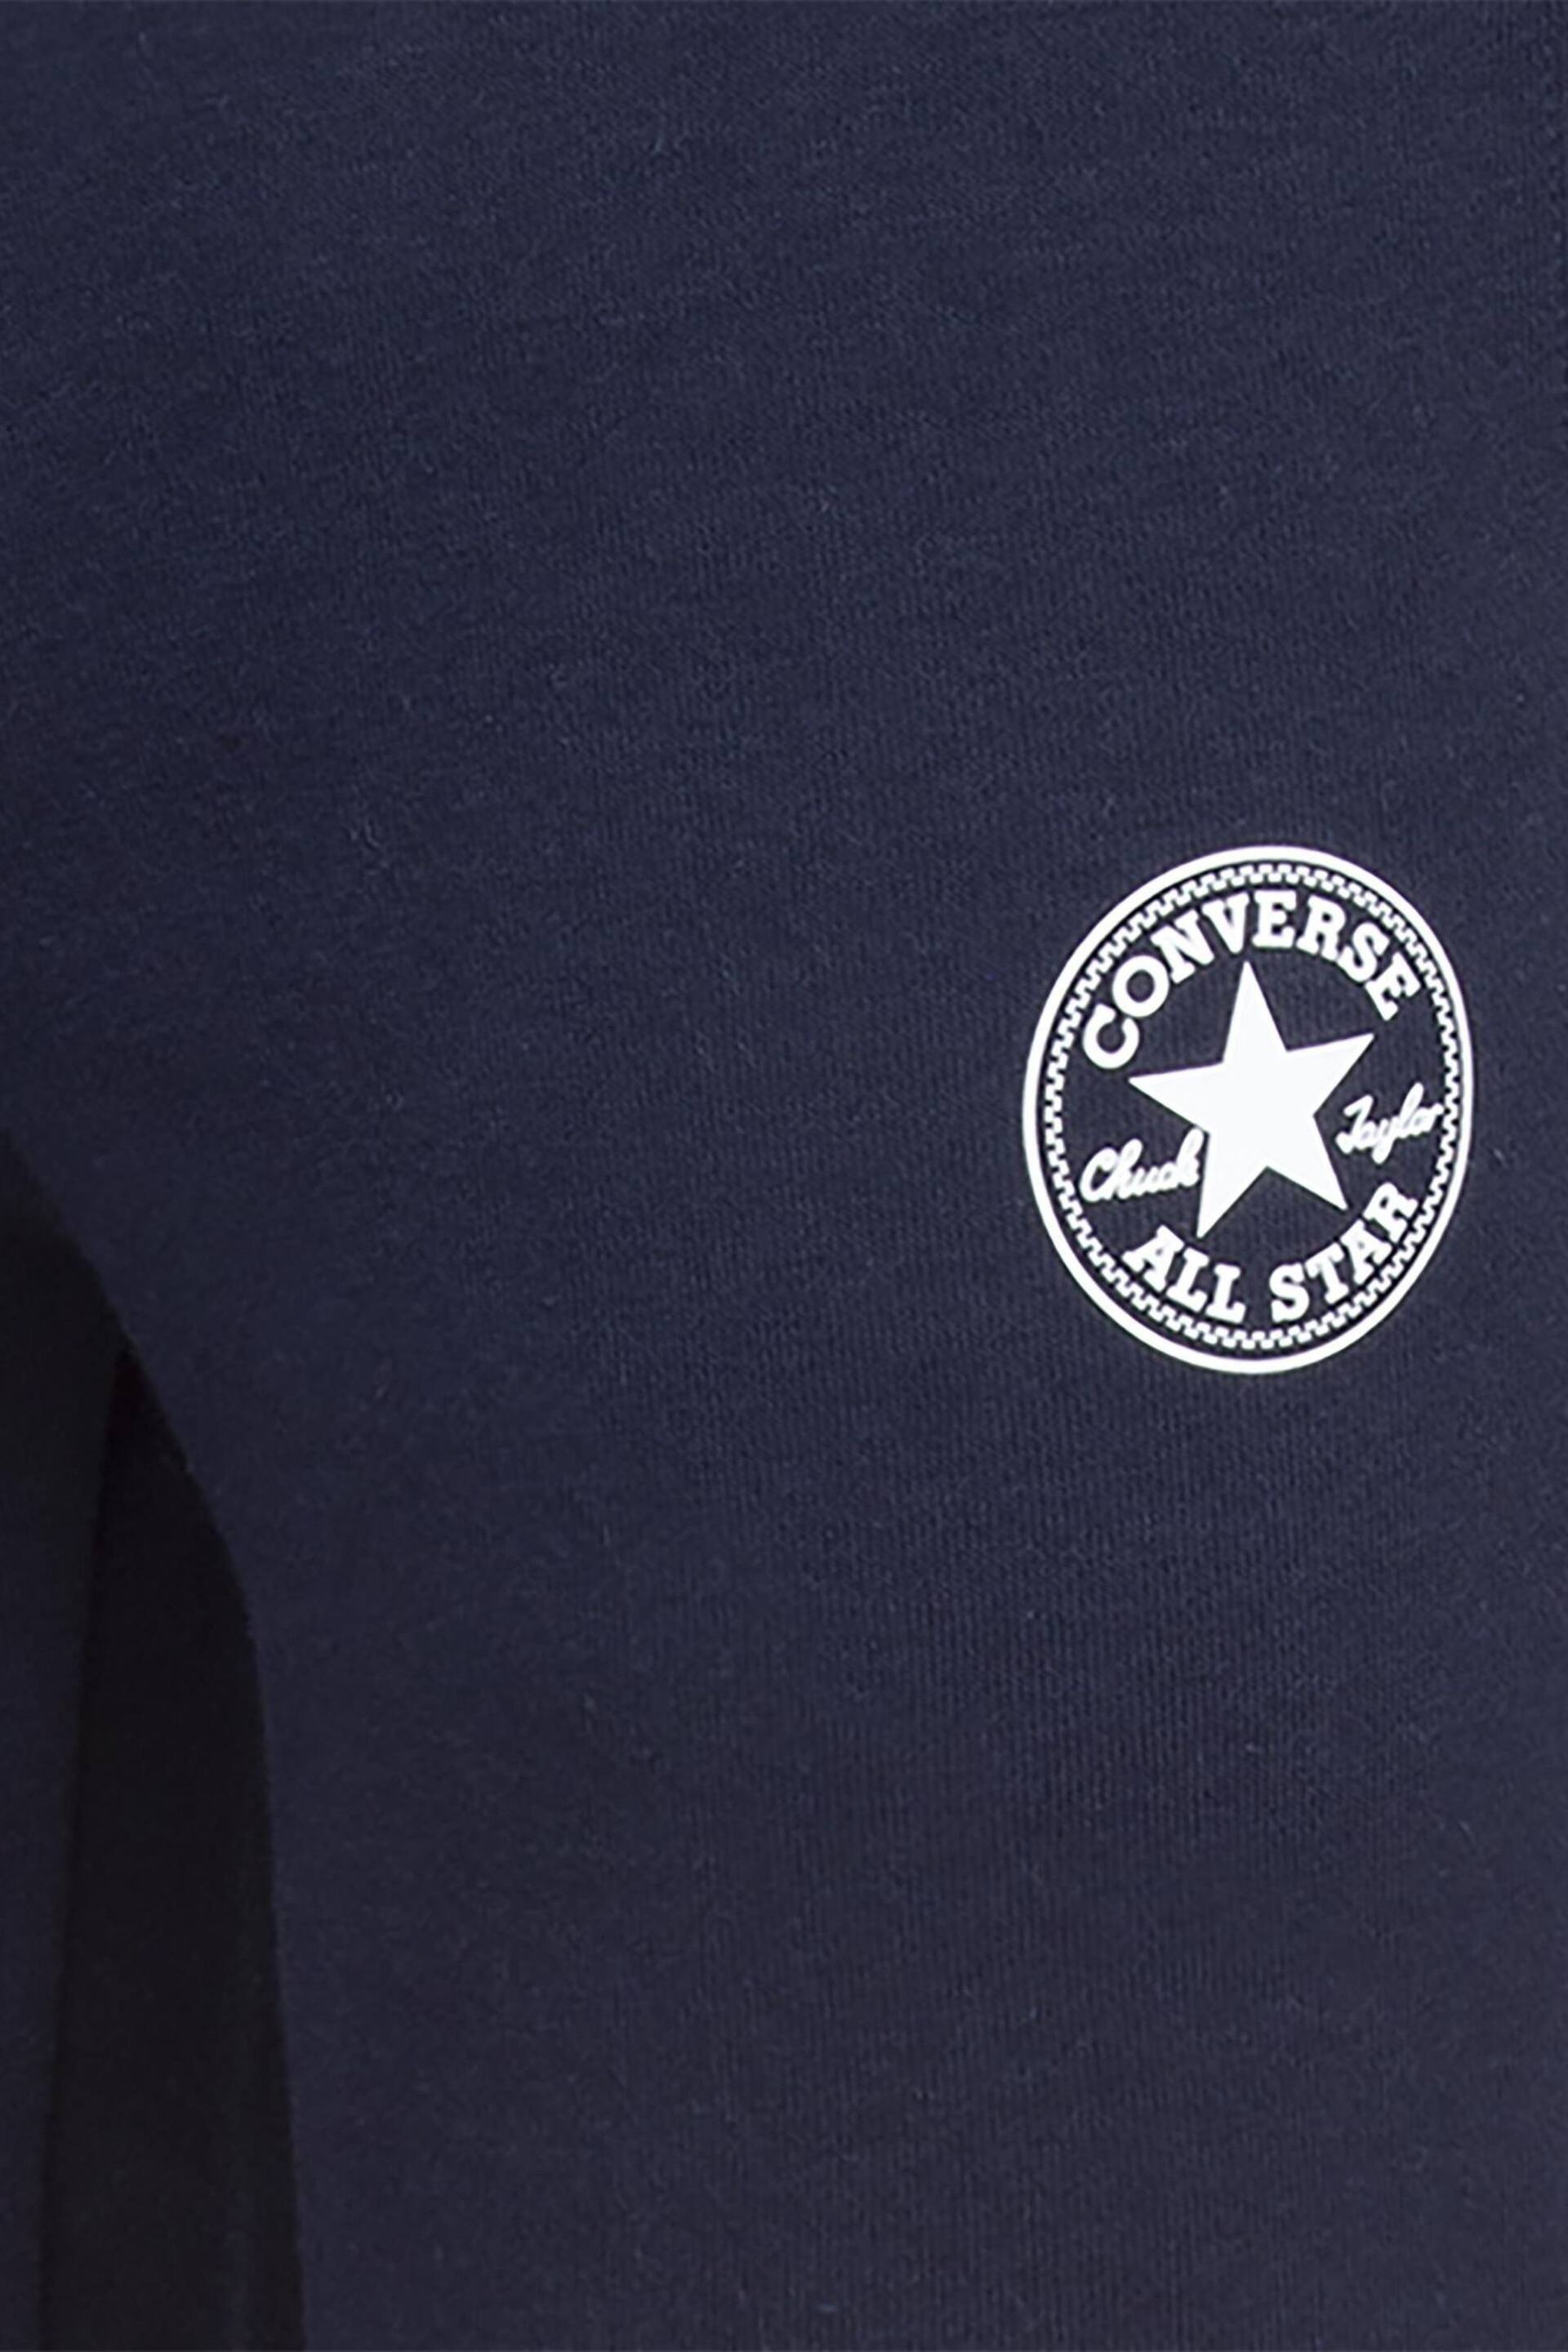 Converse Blue Signature Chuck Patch Joggers - Image 6 of 6